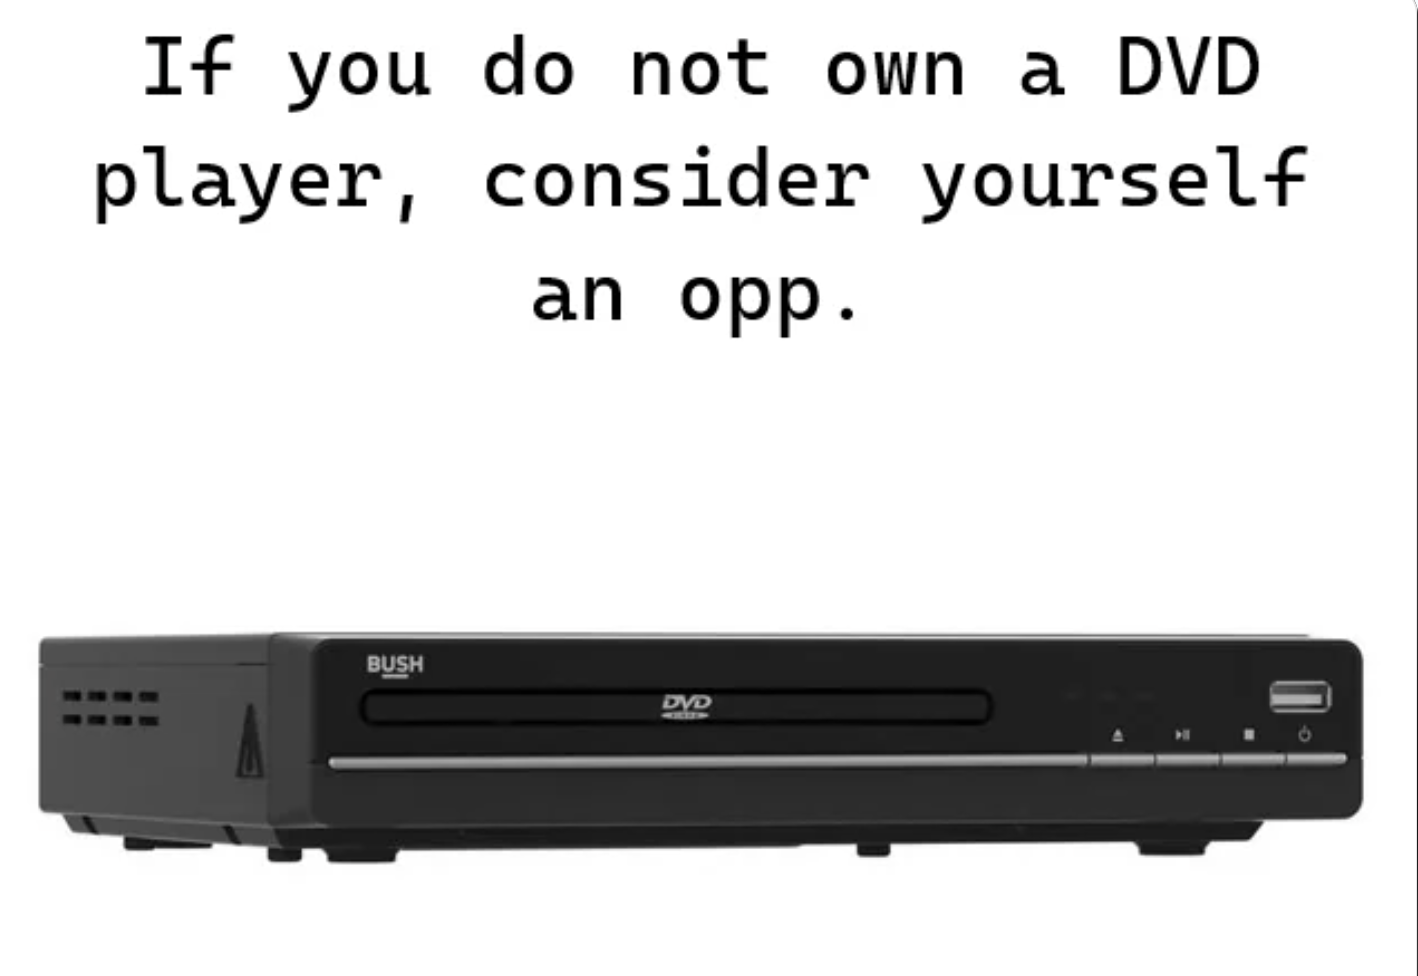 electronics - If you do not own a Dvd player, consider yourself an opp. Bush Dvd 49